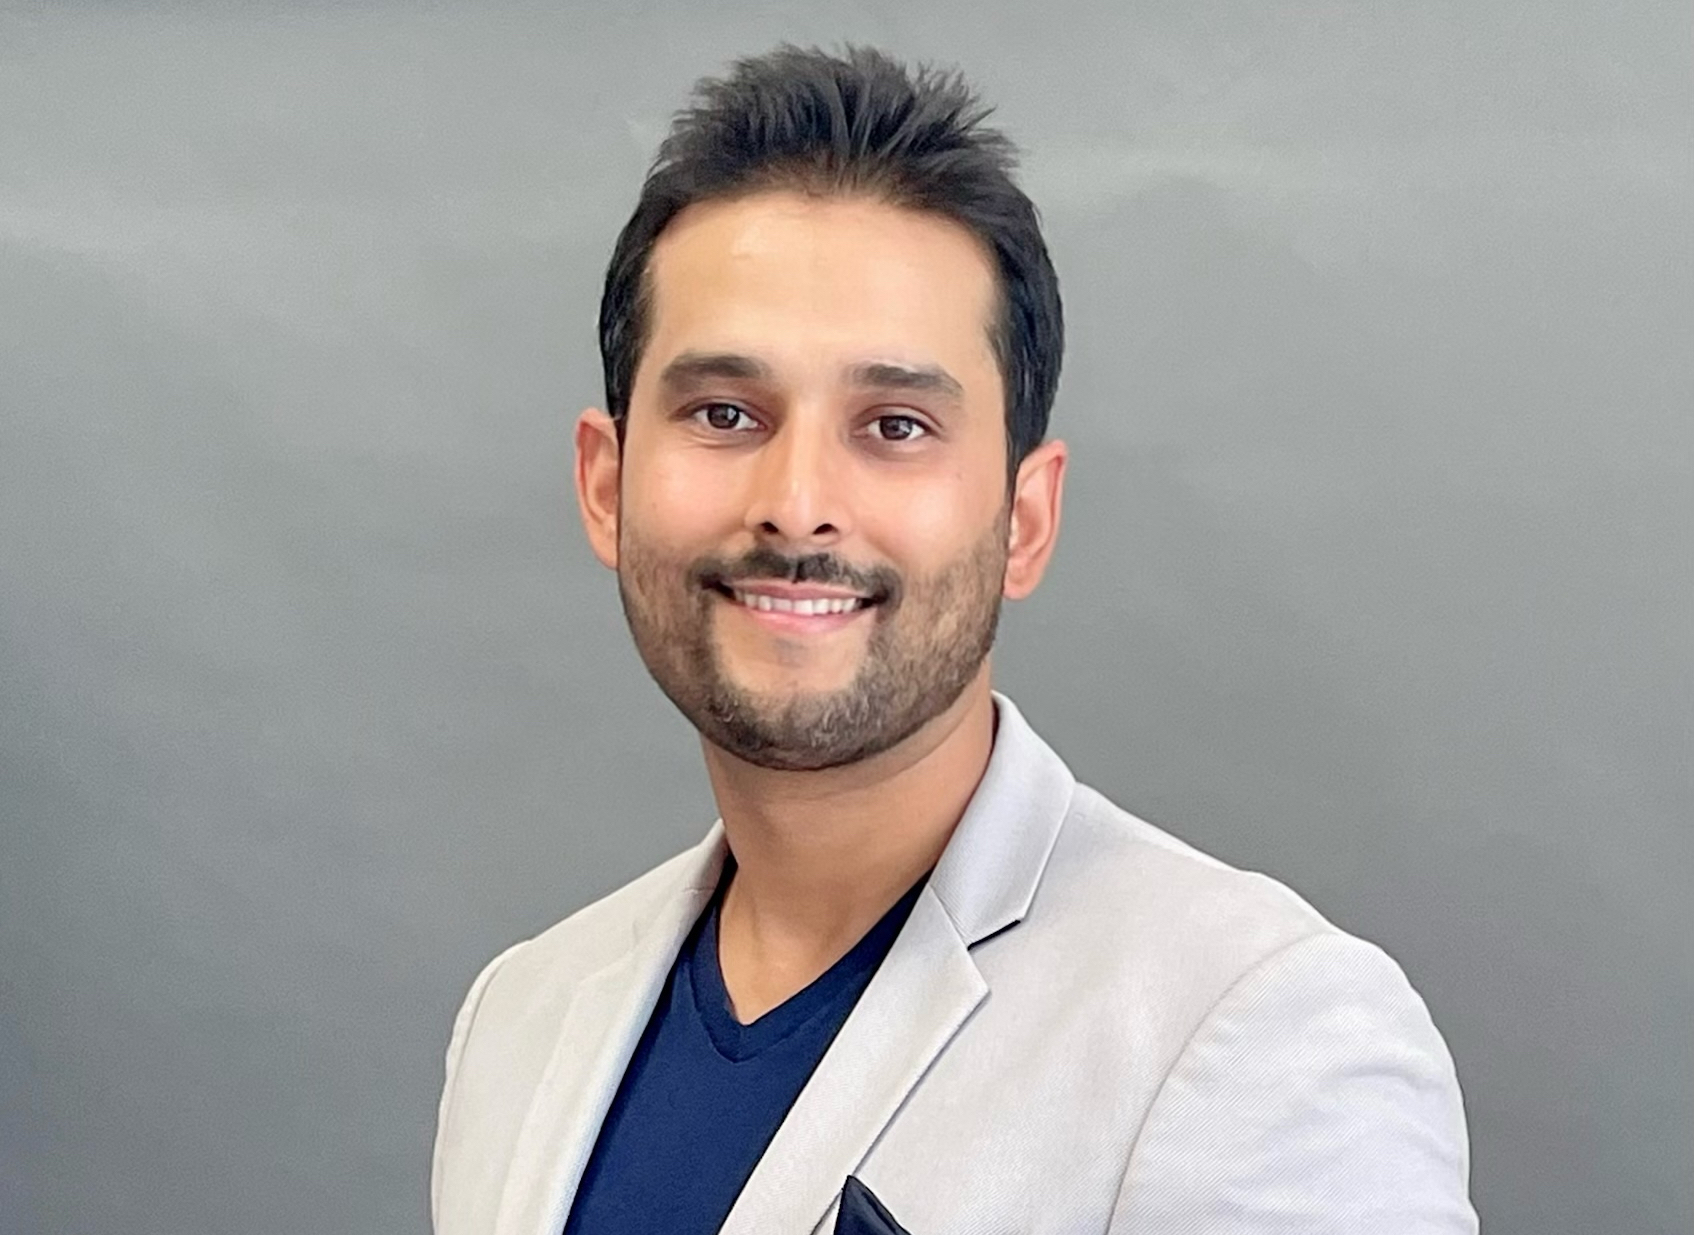  Varun Badhwar, Founder and CEO of Endor Labs, poses for a photo.